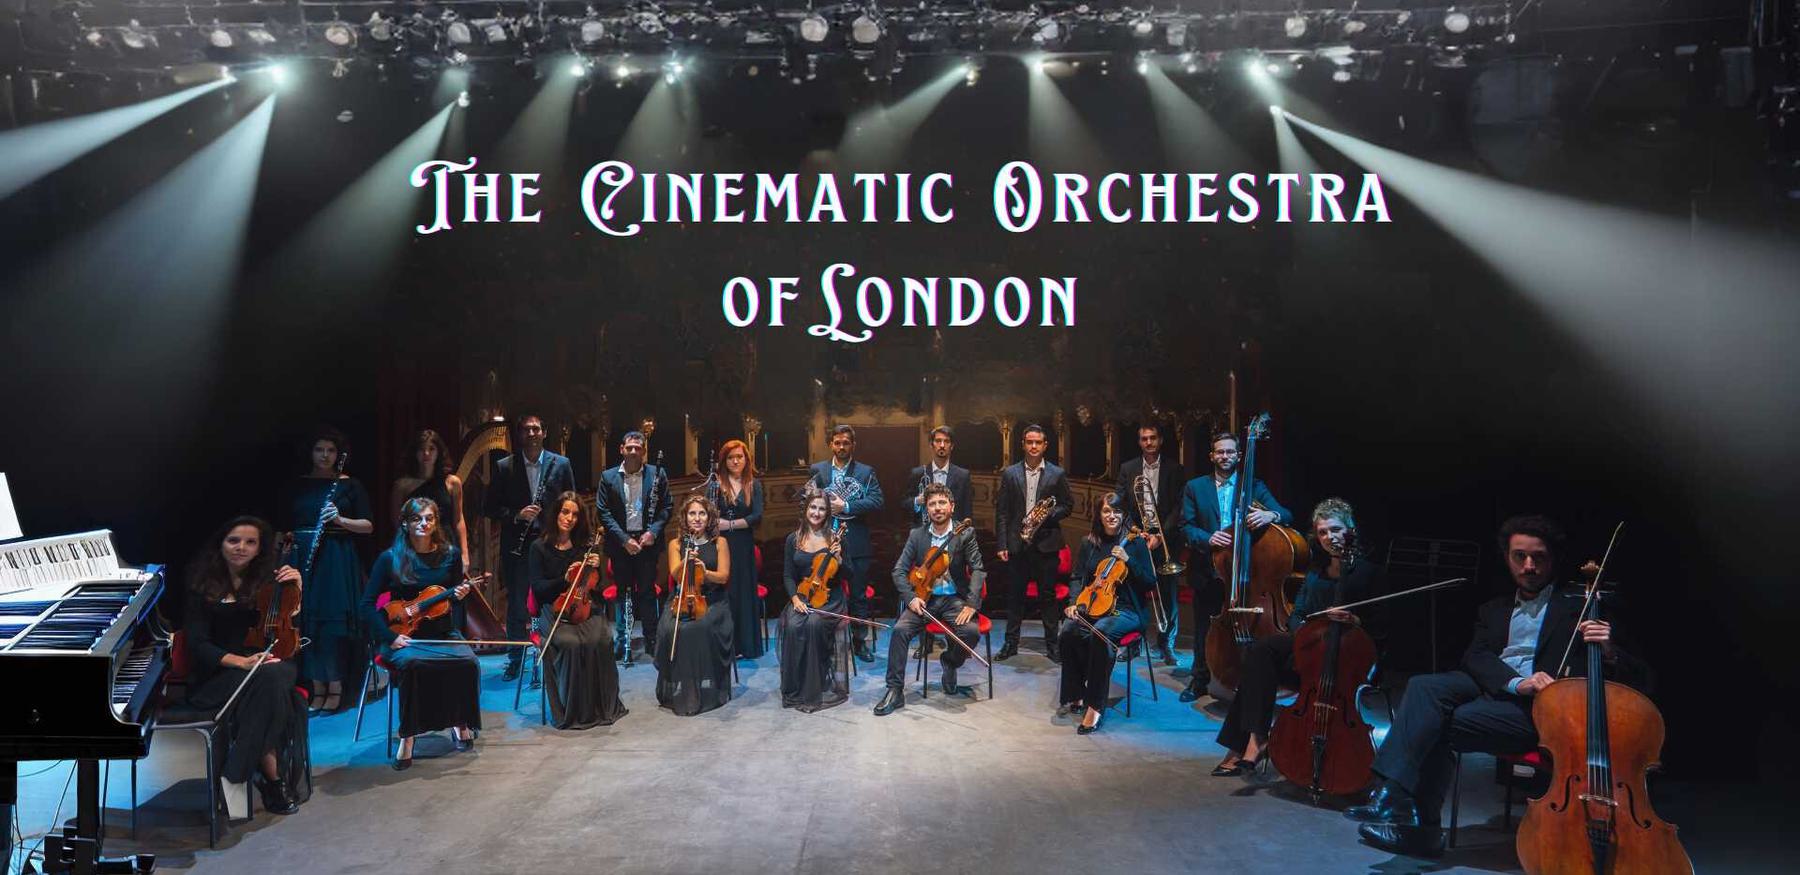 Orchestra of london